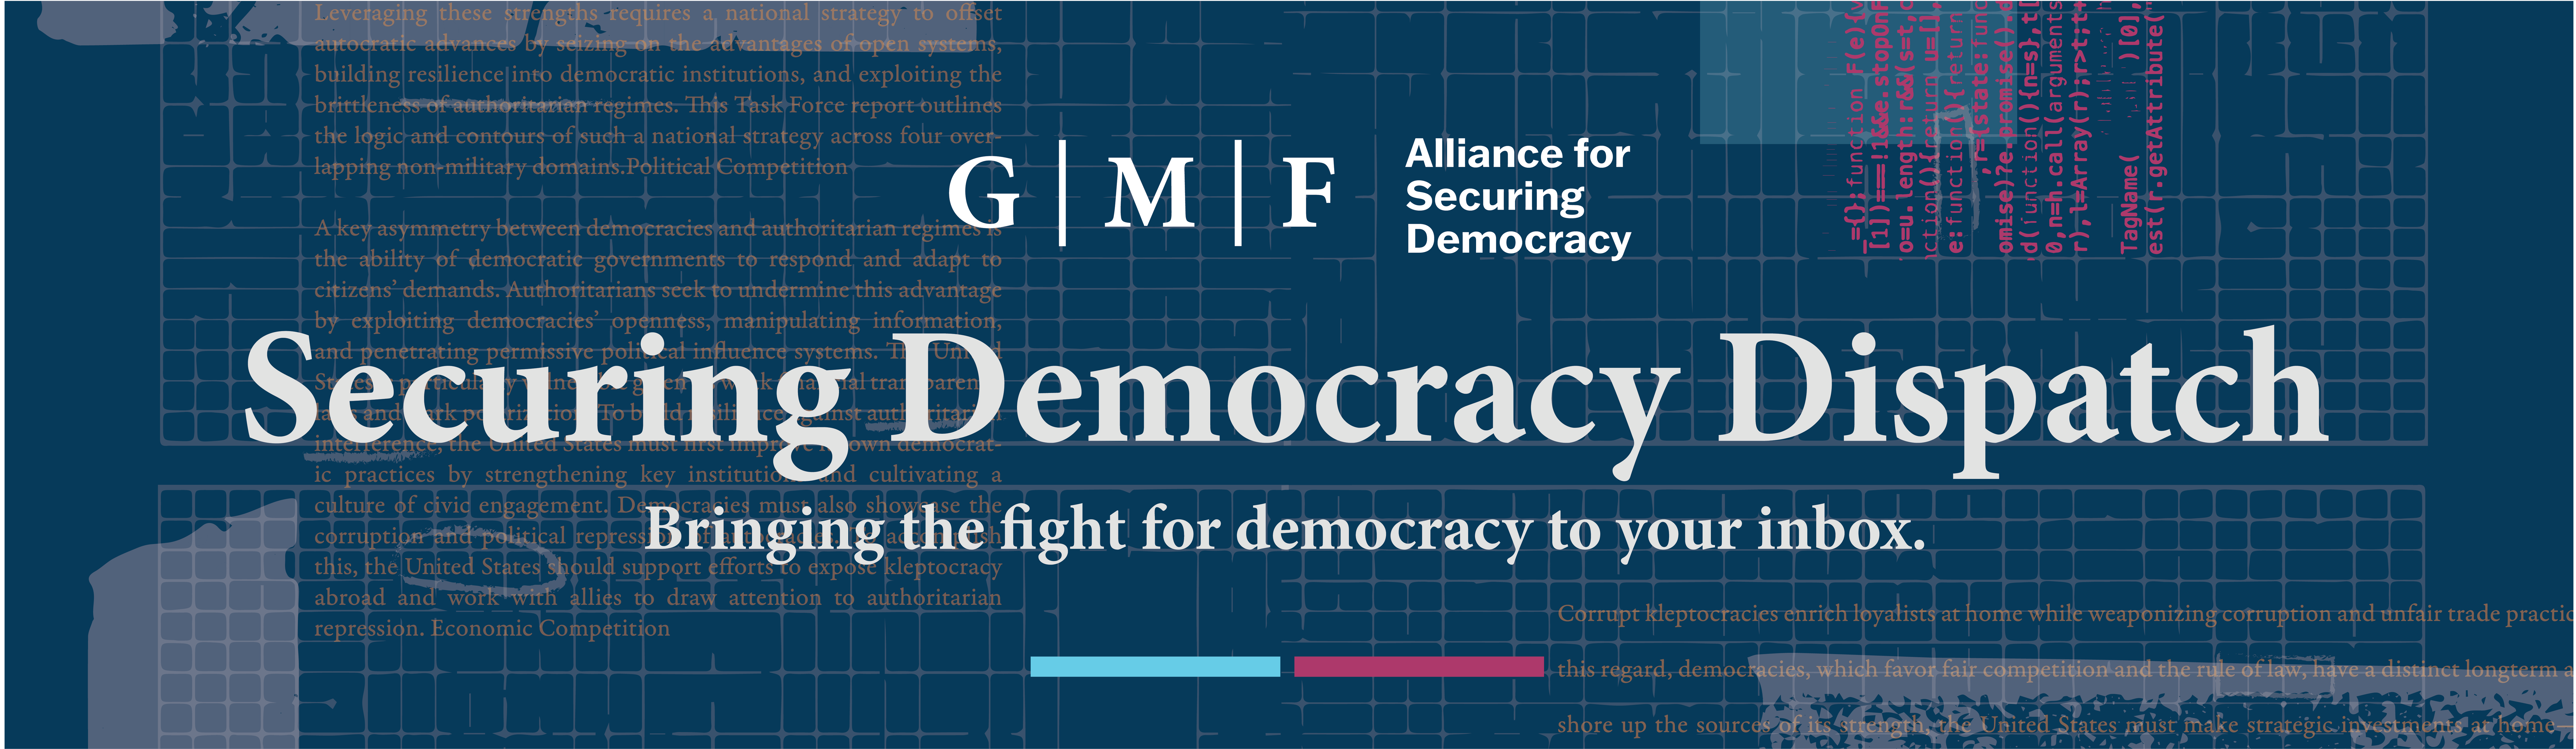 Securing Democracy Dispatch: Bringing the fight for democracy to your inbox